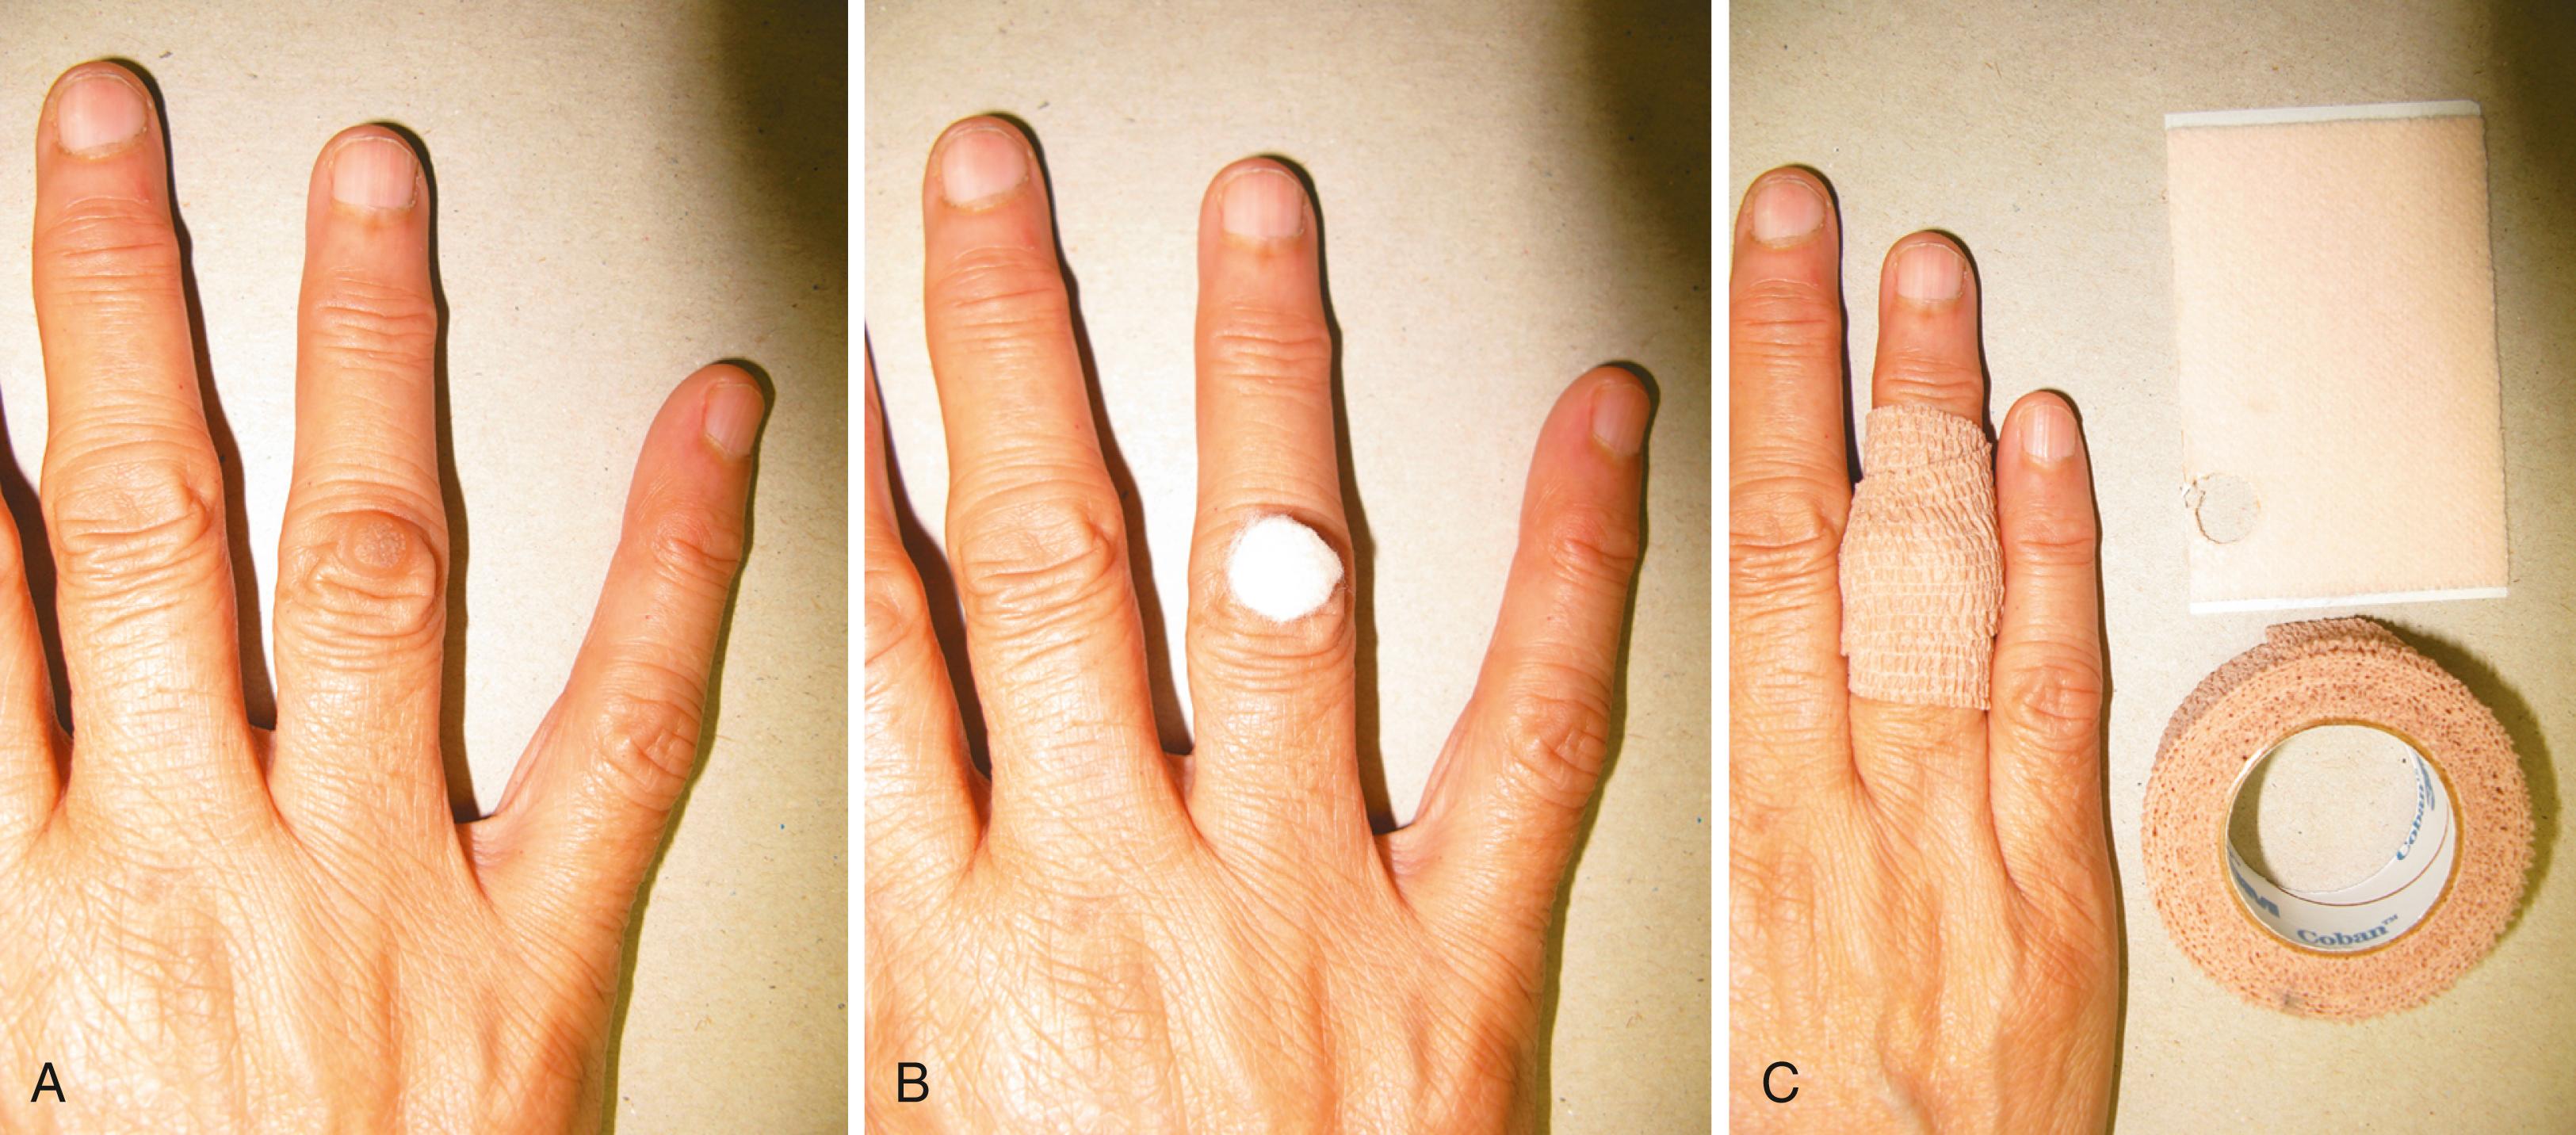 Fig. 3.3, A, Typical wart in the hand of a woman who frequently immerses her hands in water. B, A piece of medicated adhesive tape (Mediplast) slightly larger than the diameter of the wart is applied over the lesion. C, The tape is secured in place with waterproof tape (Coban).